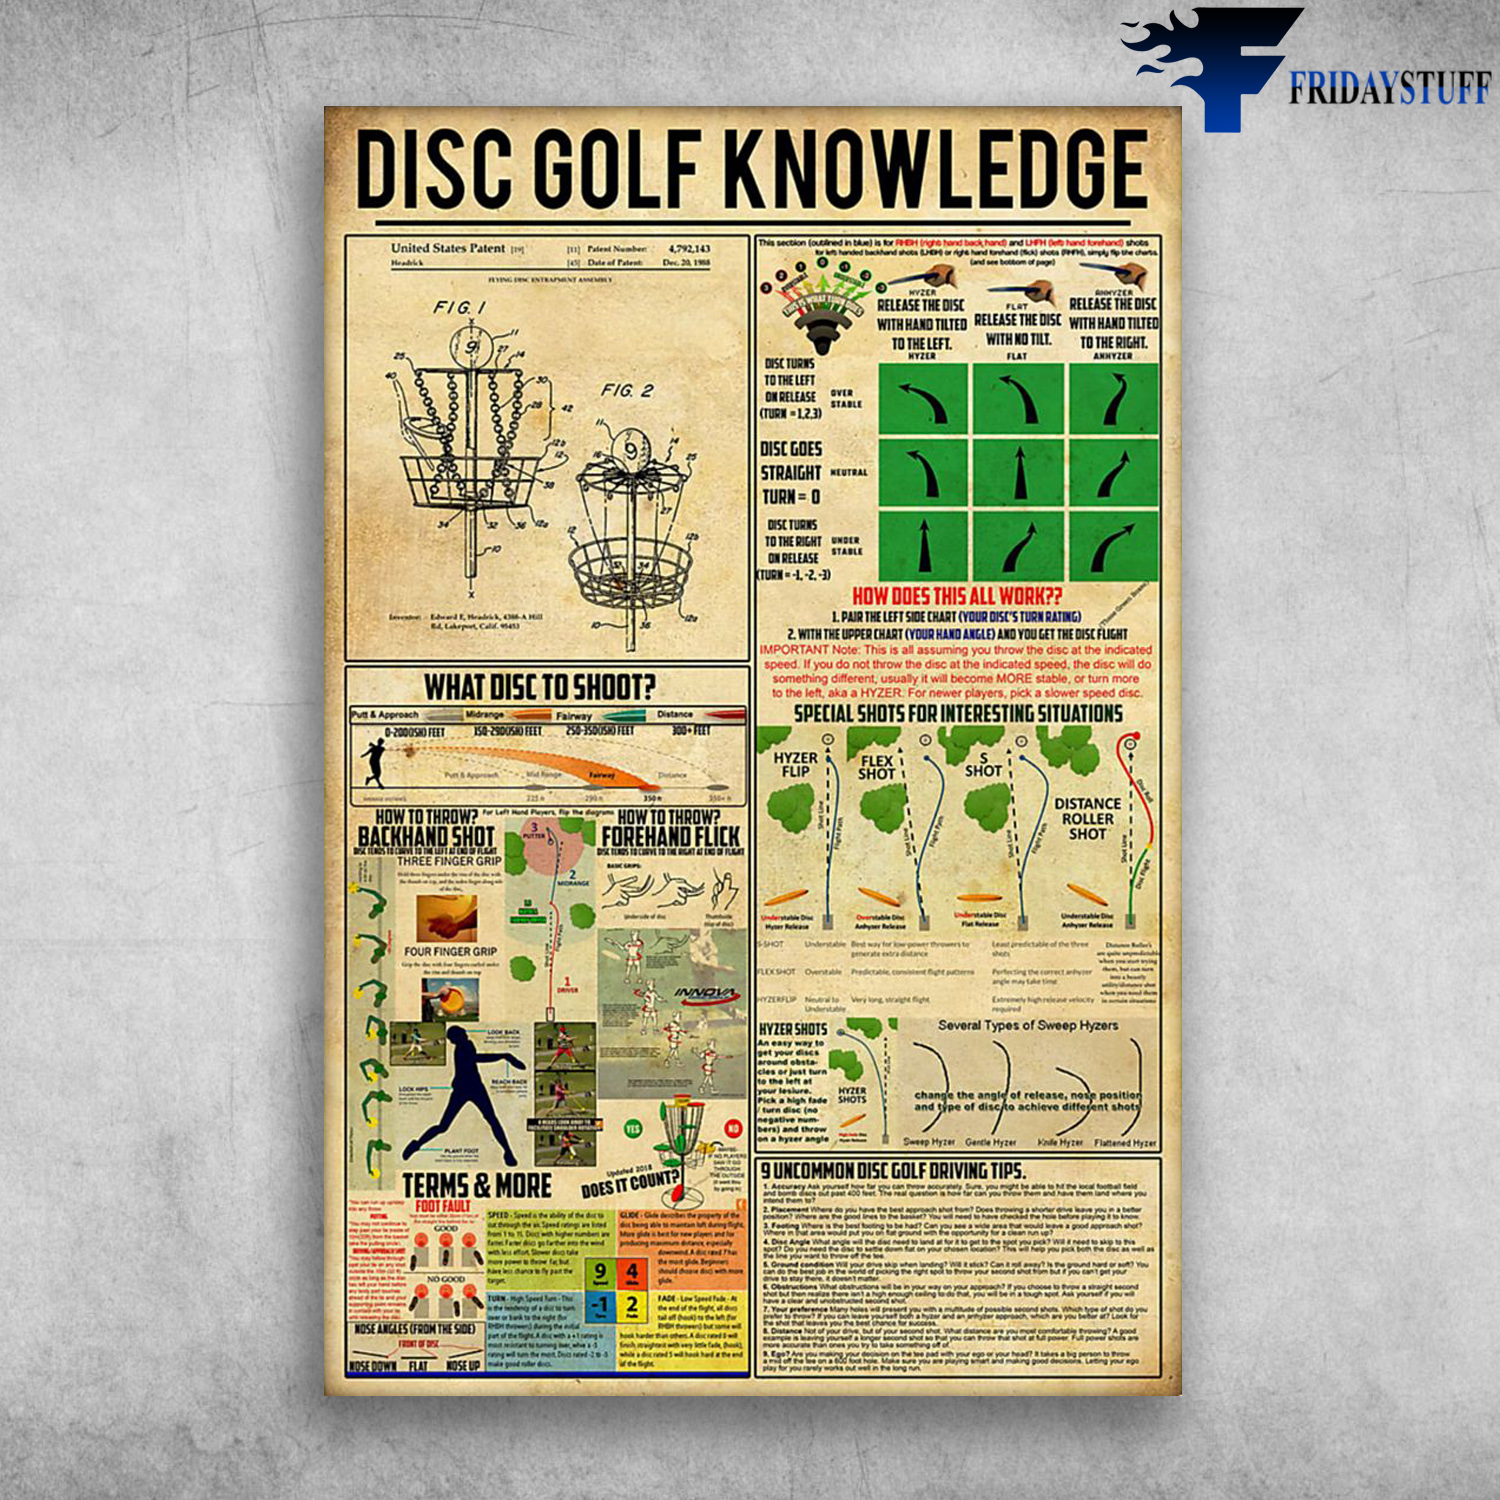 Disc Golf Knowledge - What Disc To Shoot, How To Throw, Backhand Shot, How To Throw Forehand Flick, Special Shoots For Interesting Situations, How Does This All Works